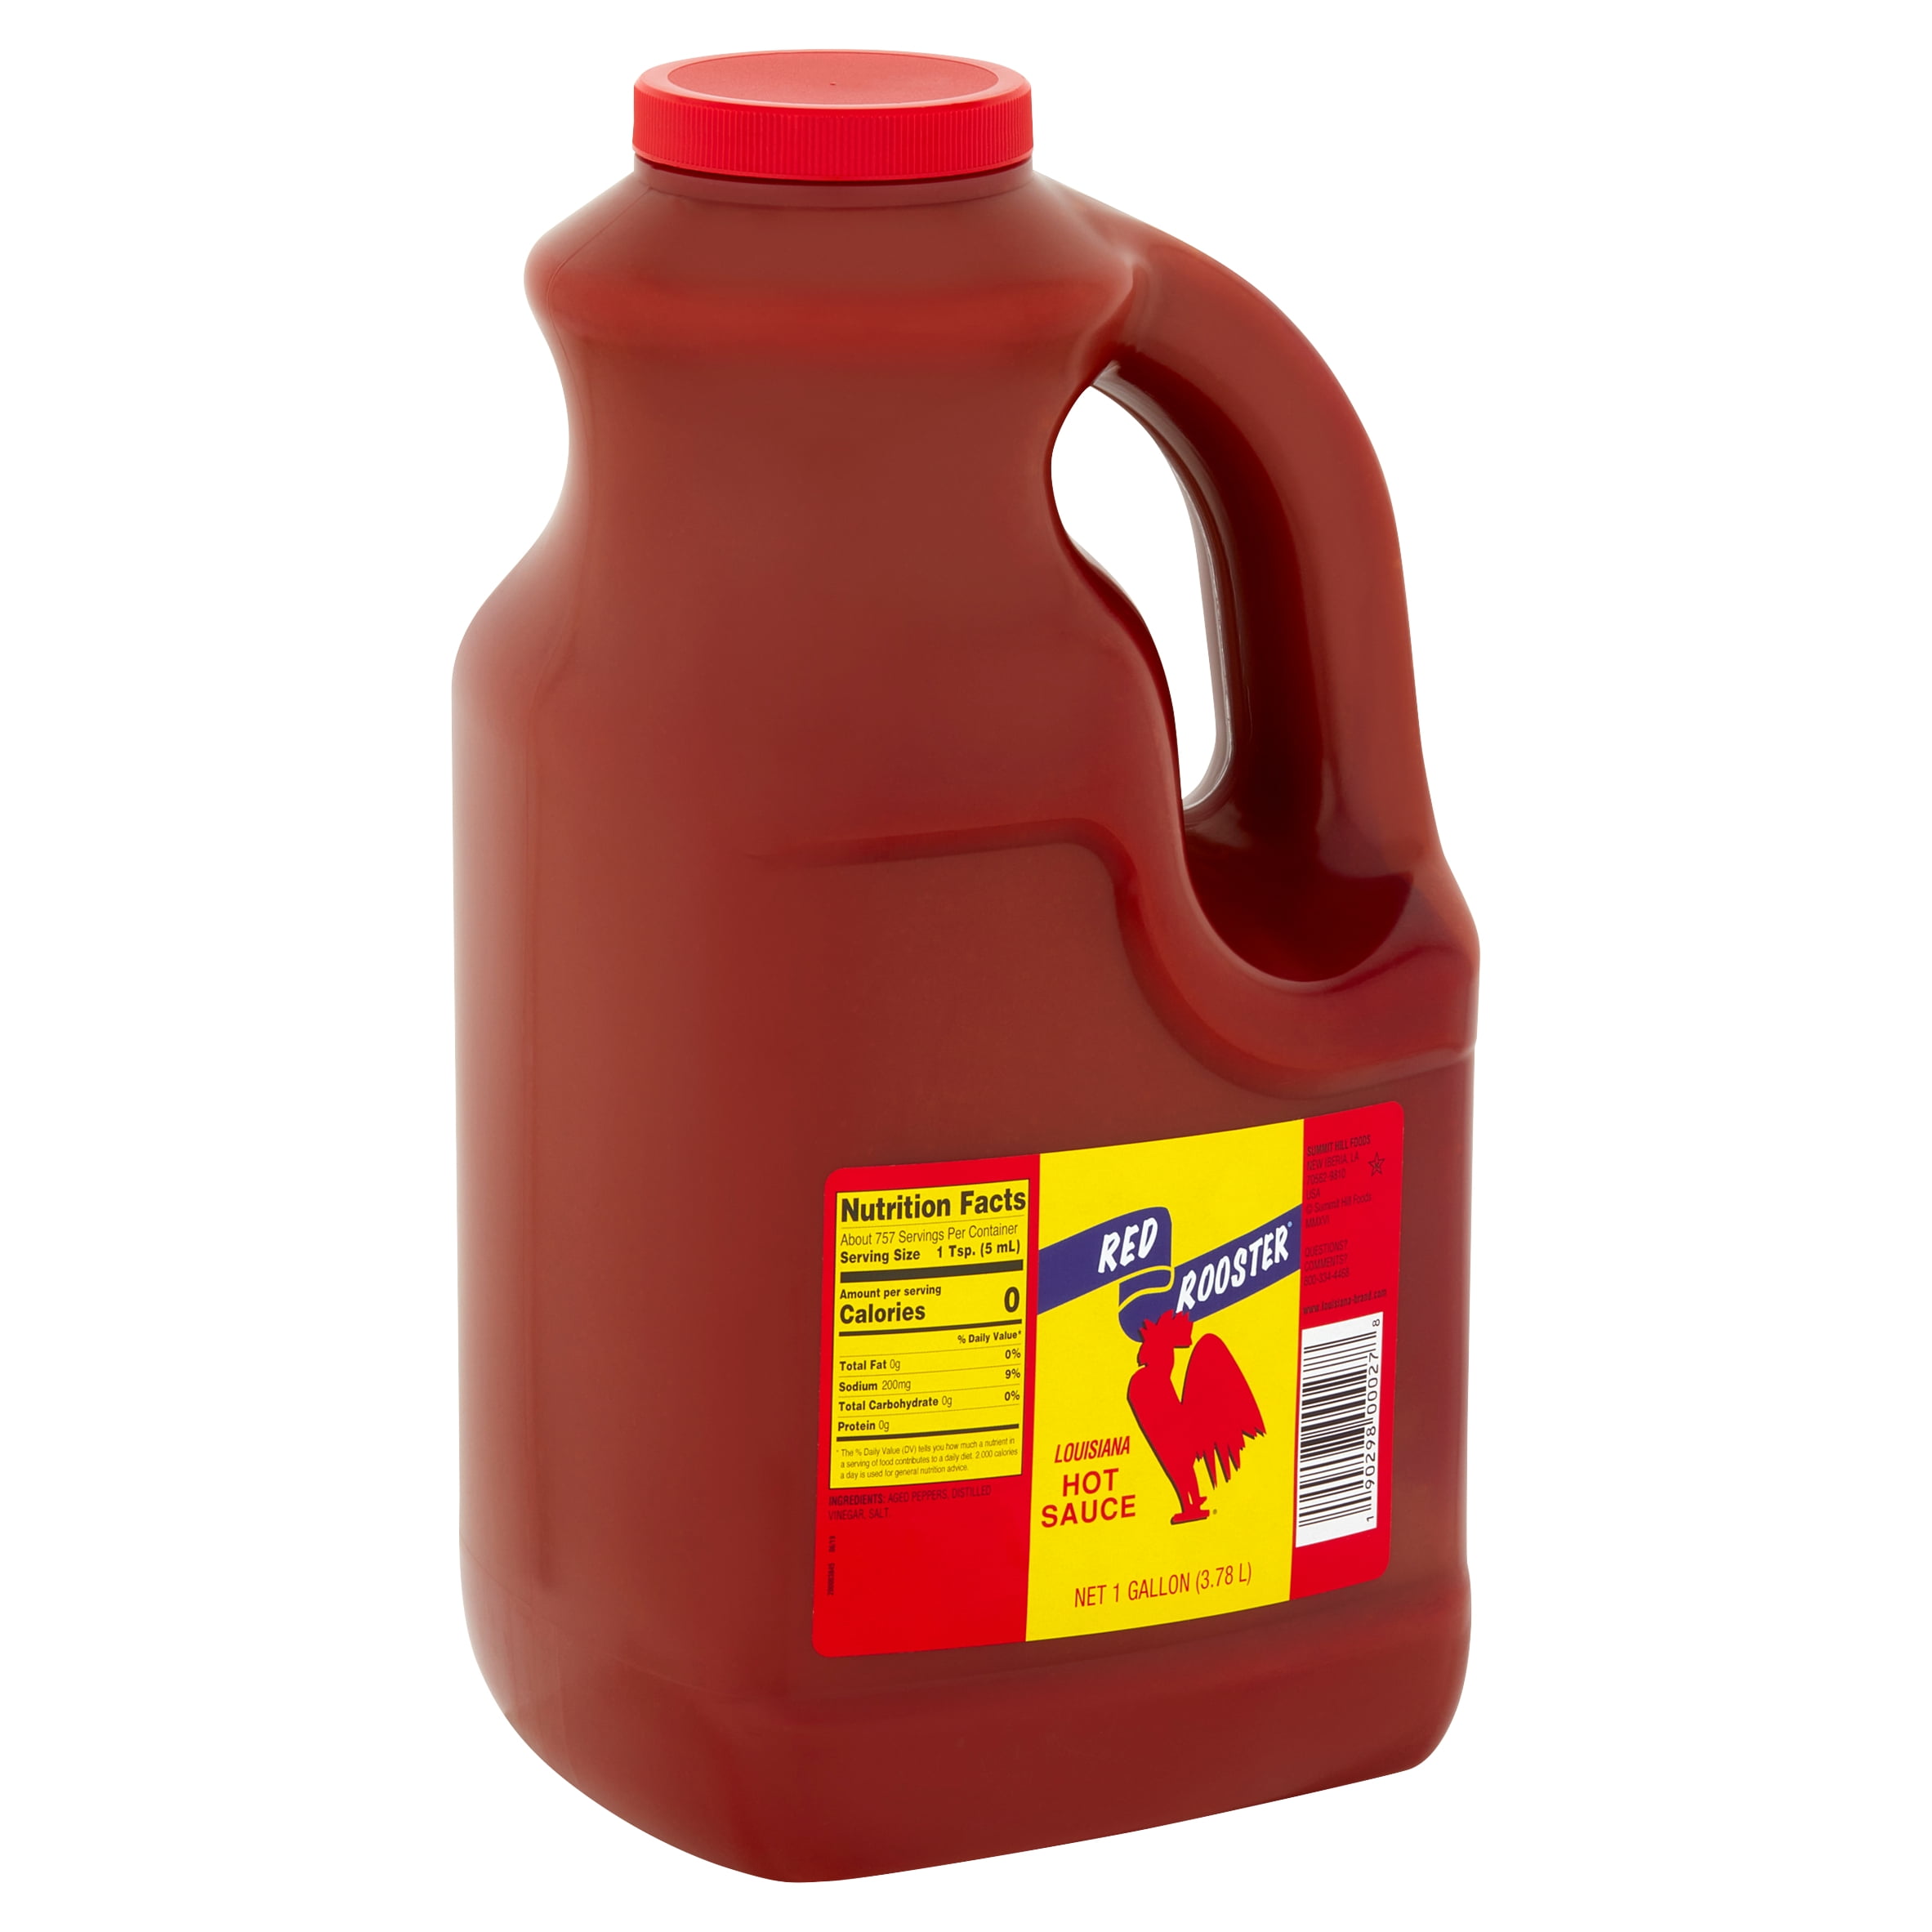 Red Rooster Hot Sauce, 1 Gallon